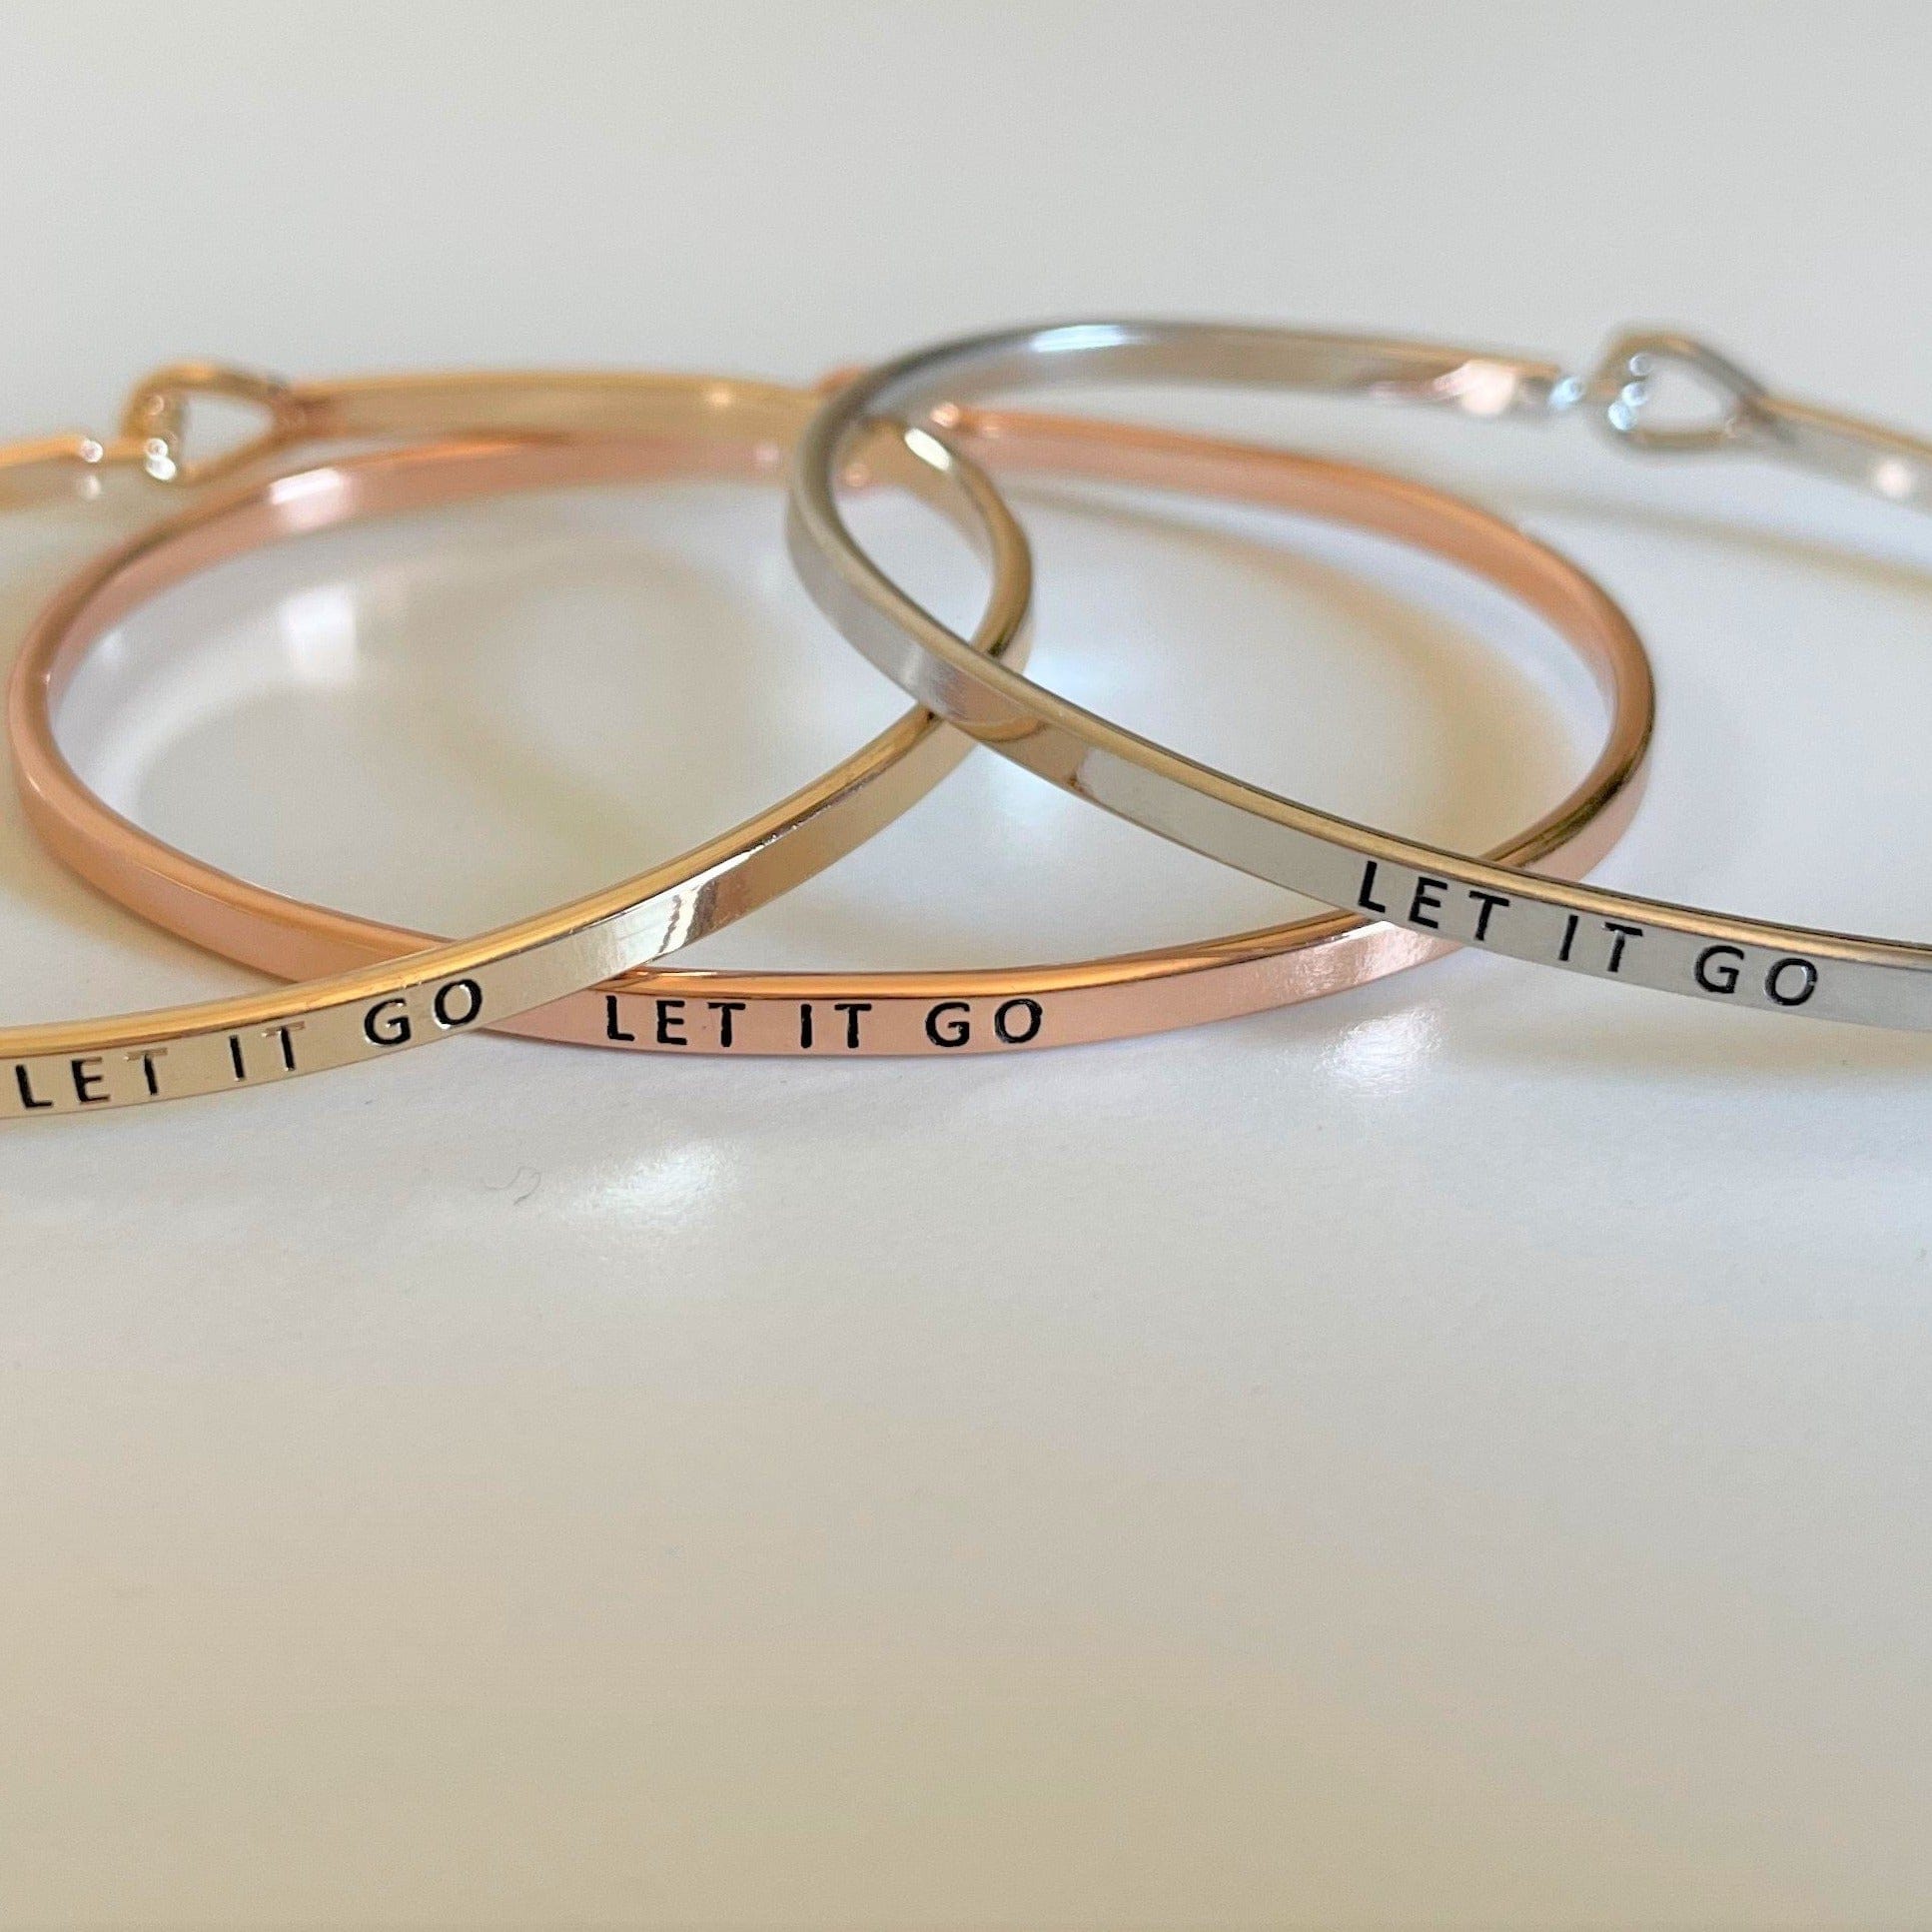 "Let It Go" Bracelet By Recovery Matters